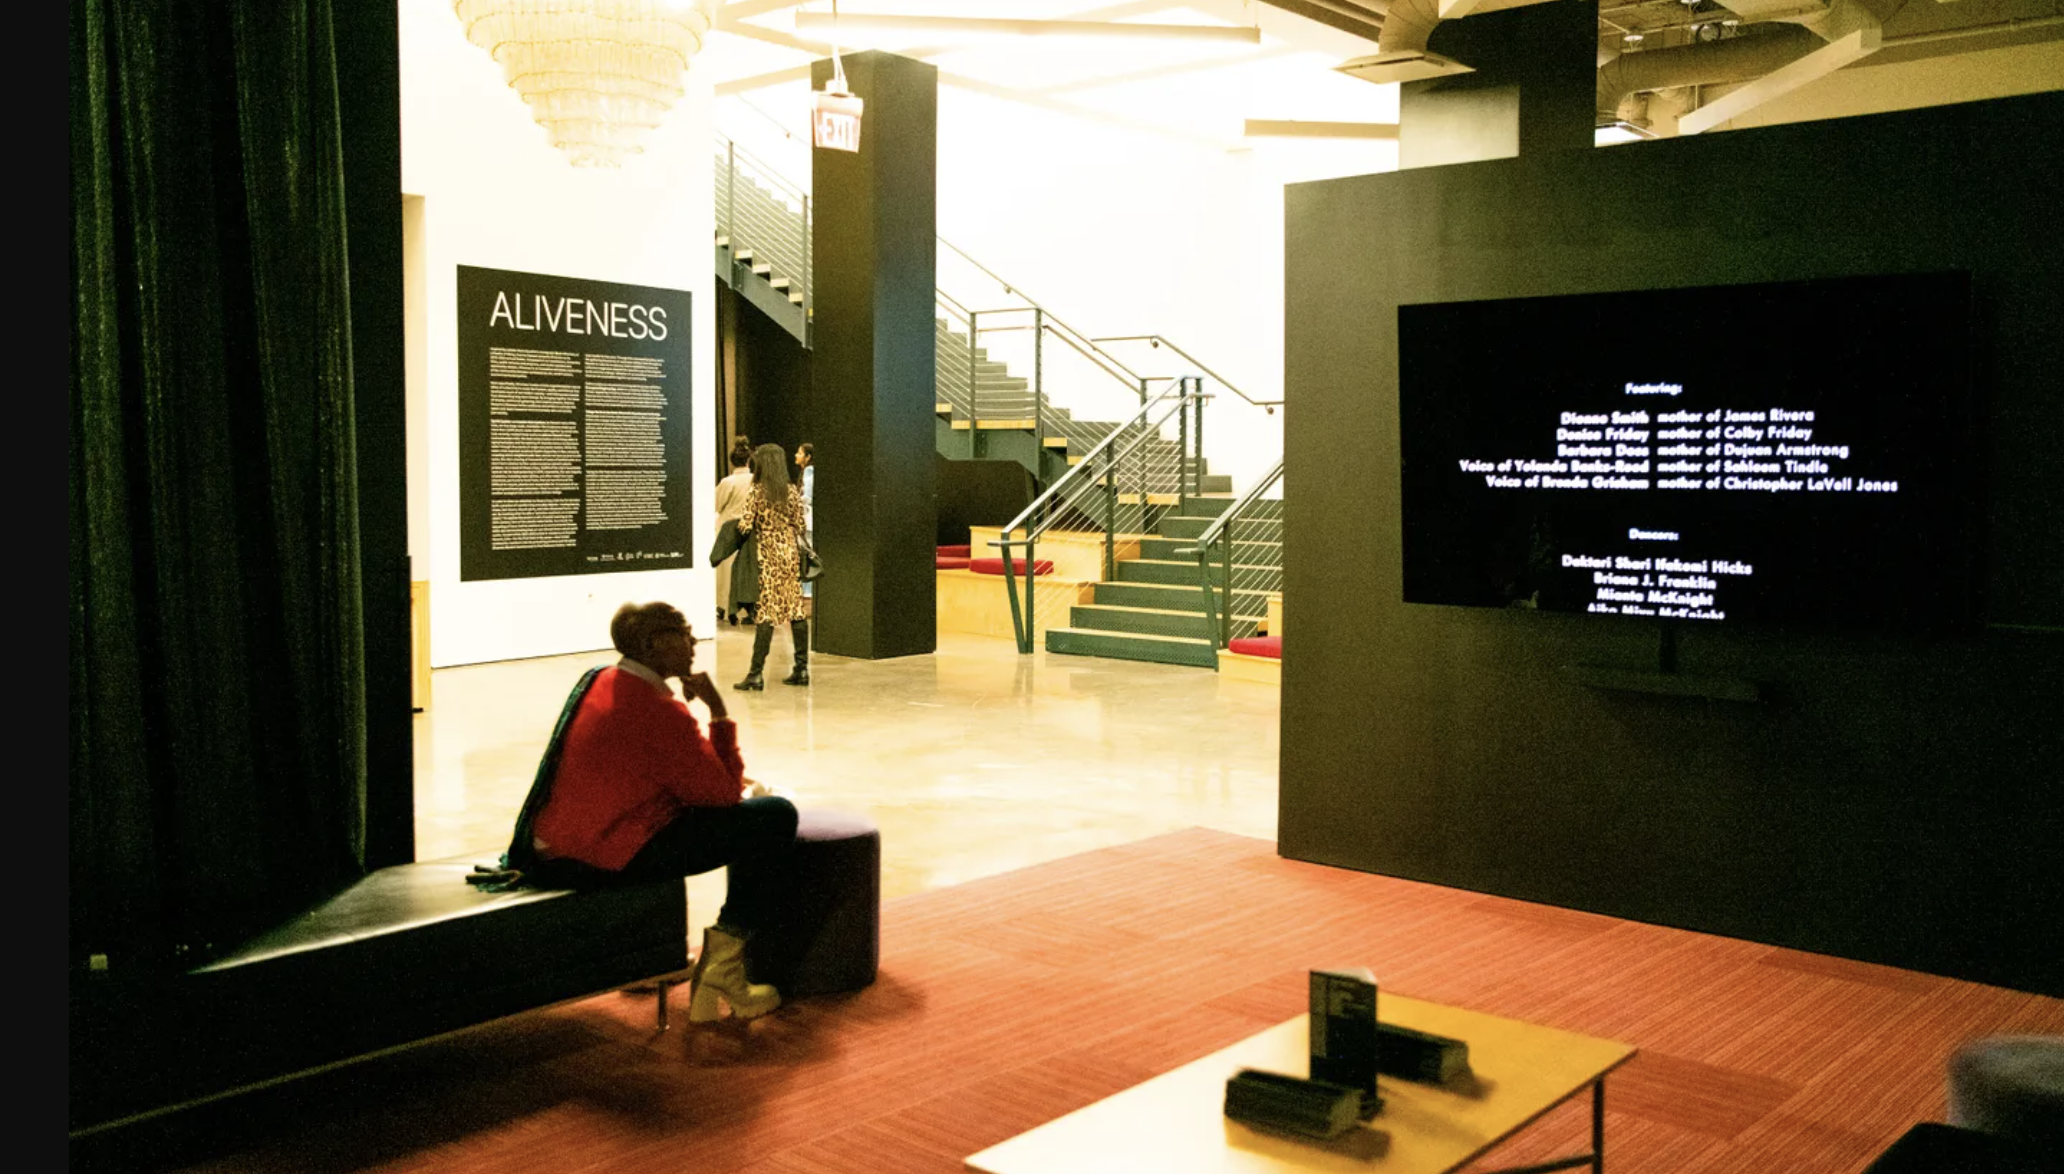 An image of someone watching a film at an exhibit